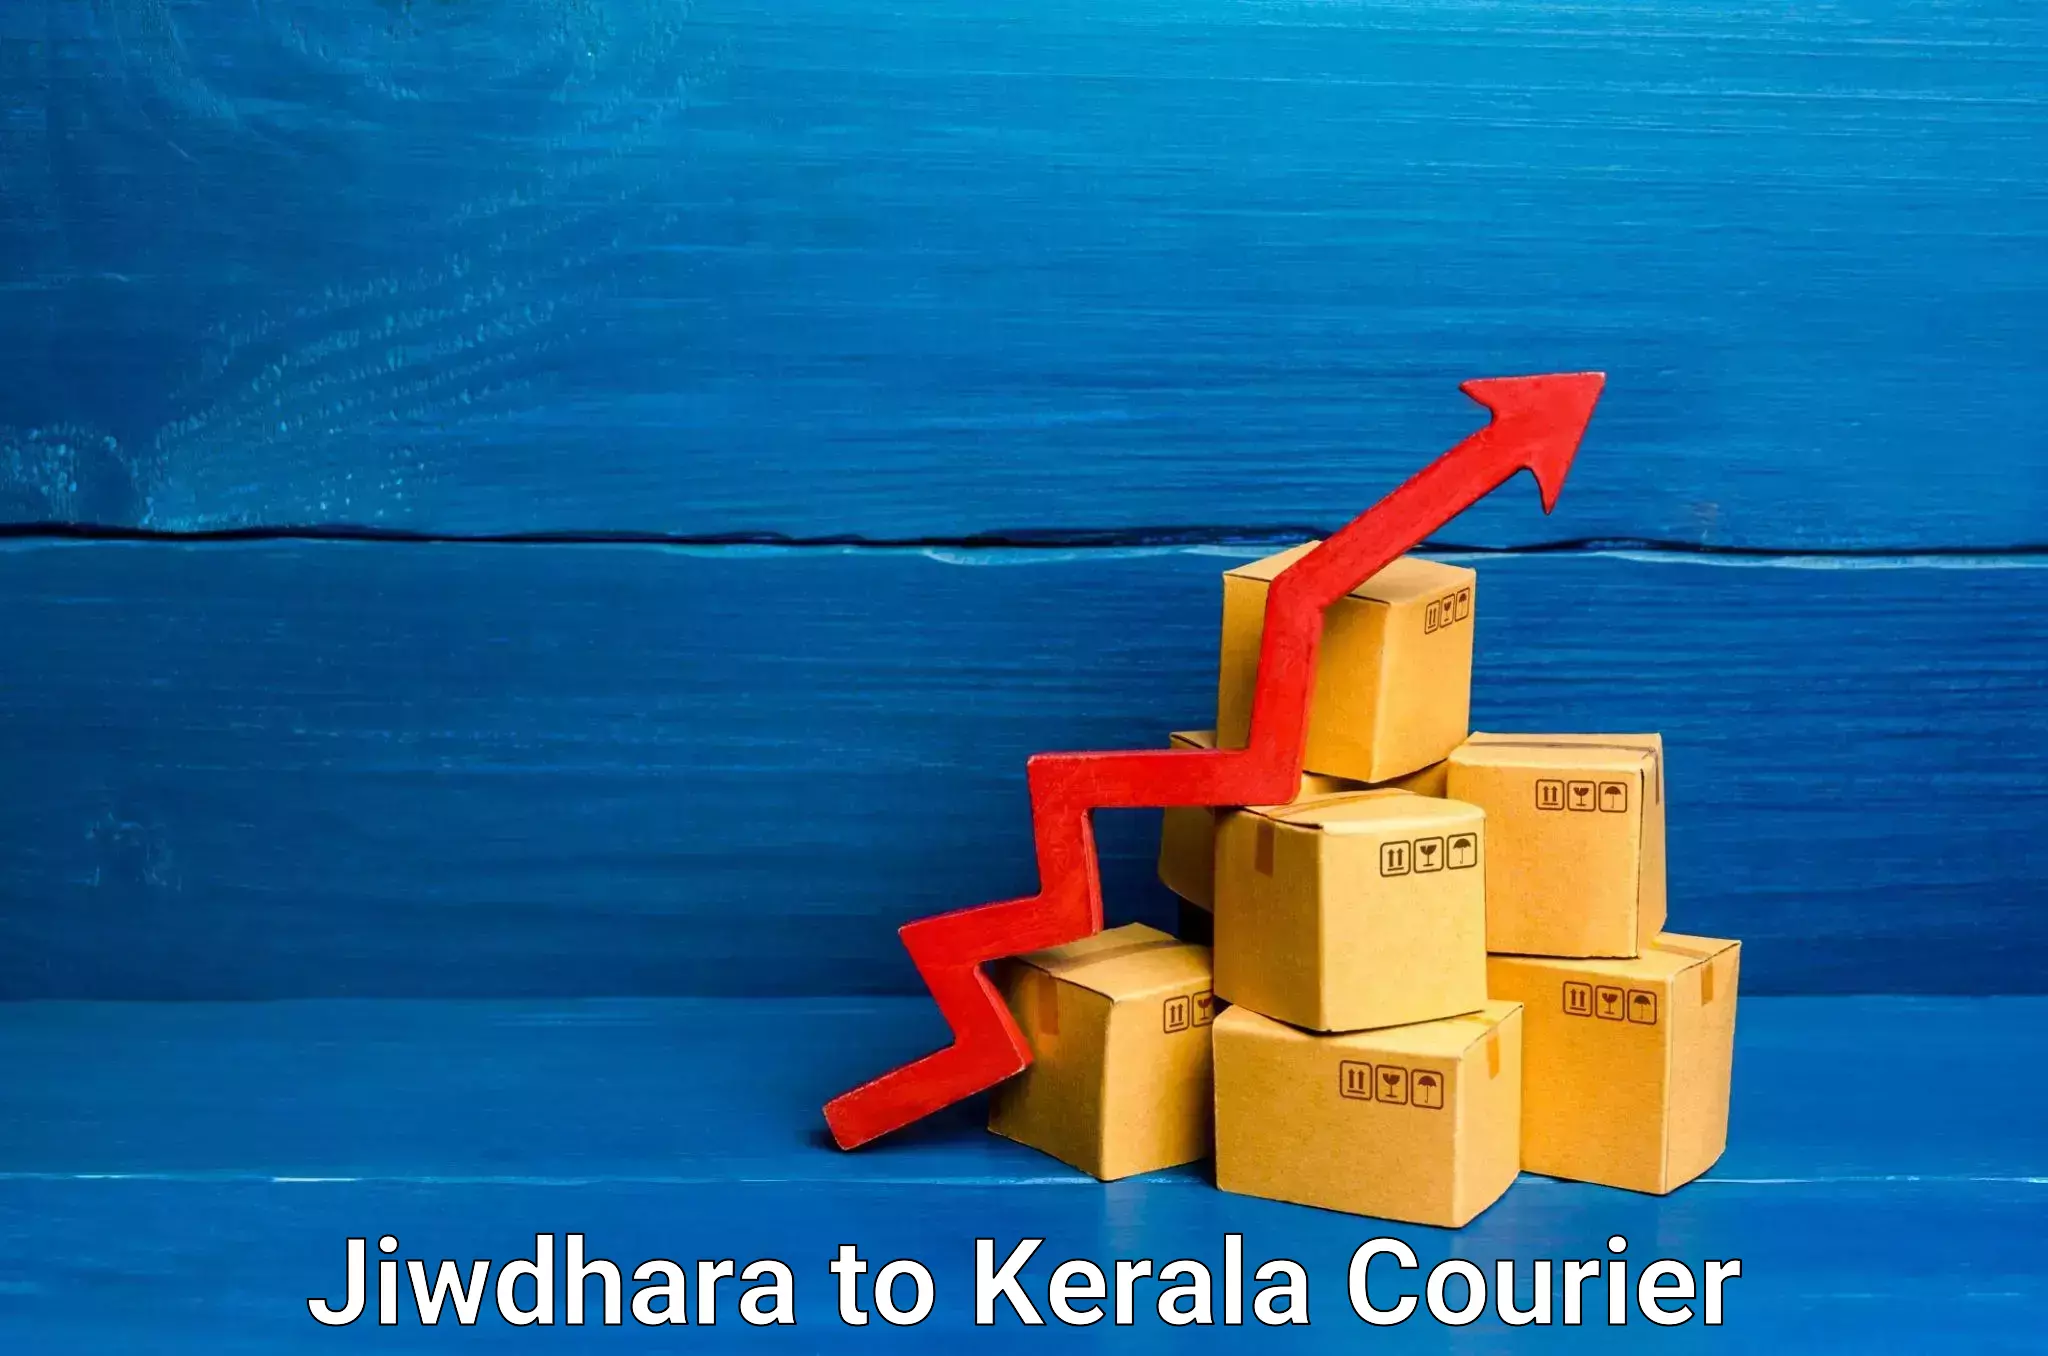 Efficient relocation services Jiwdhara to Puthukkad